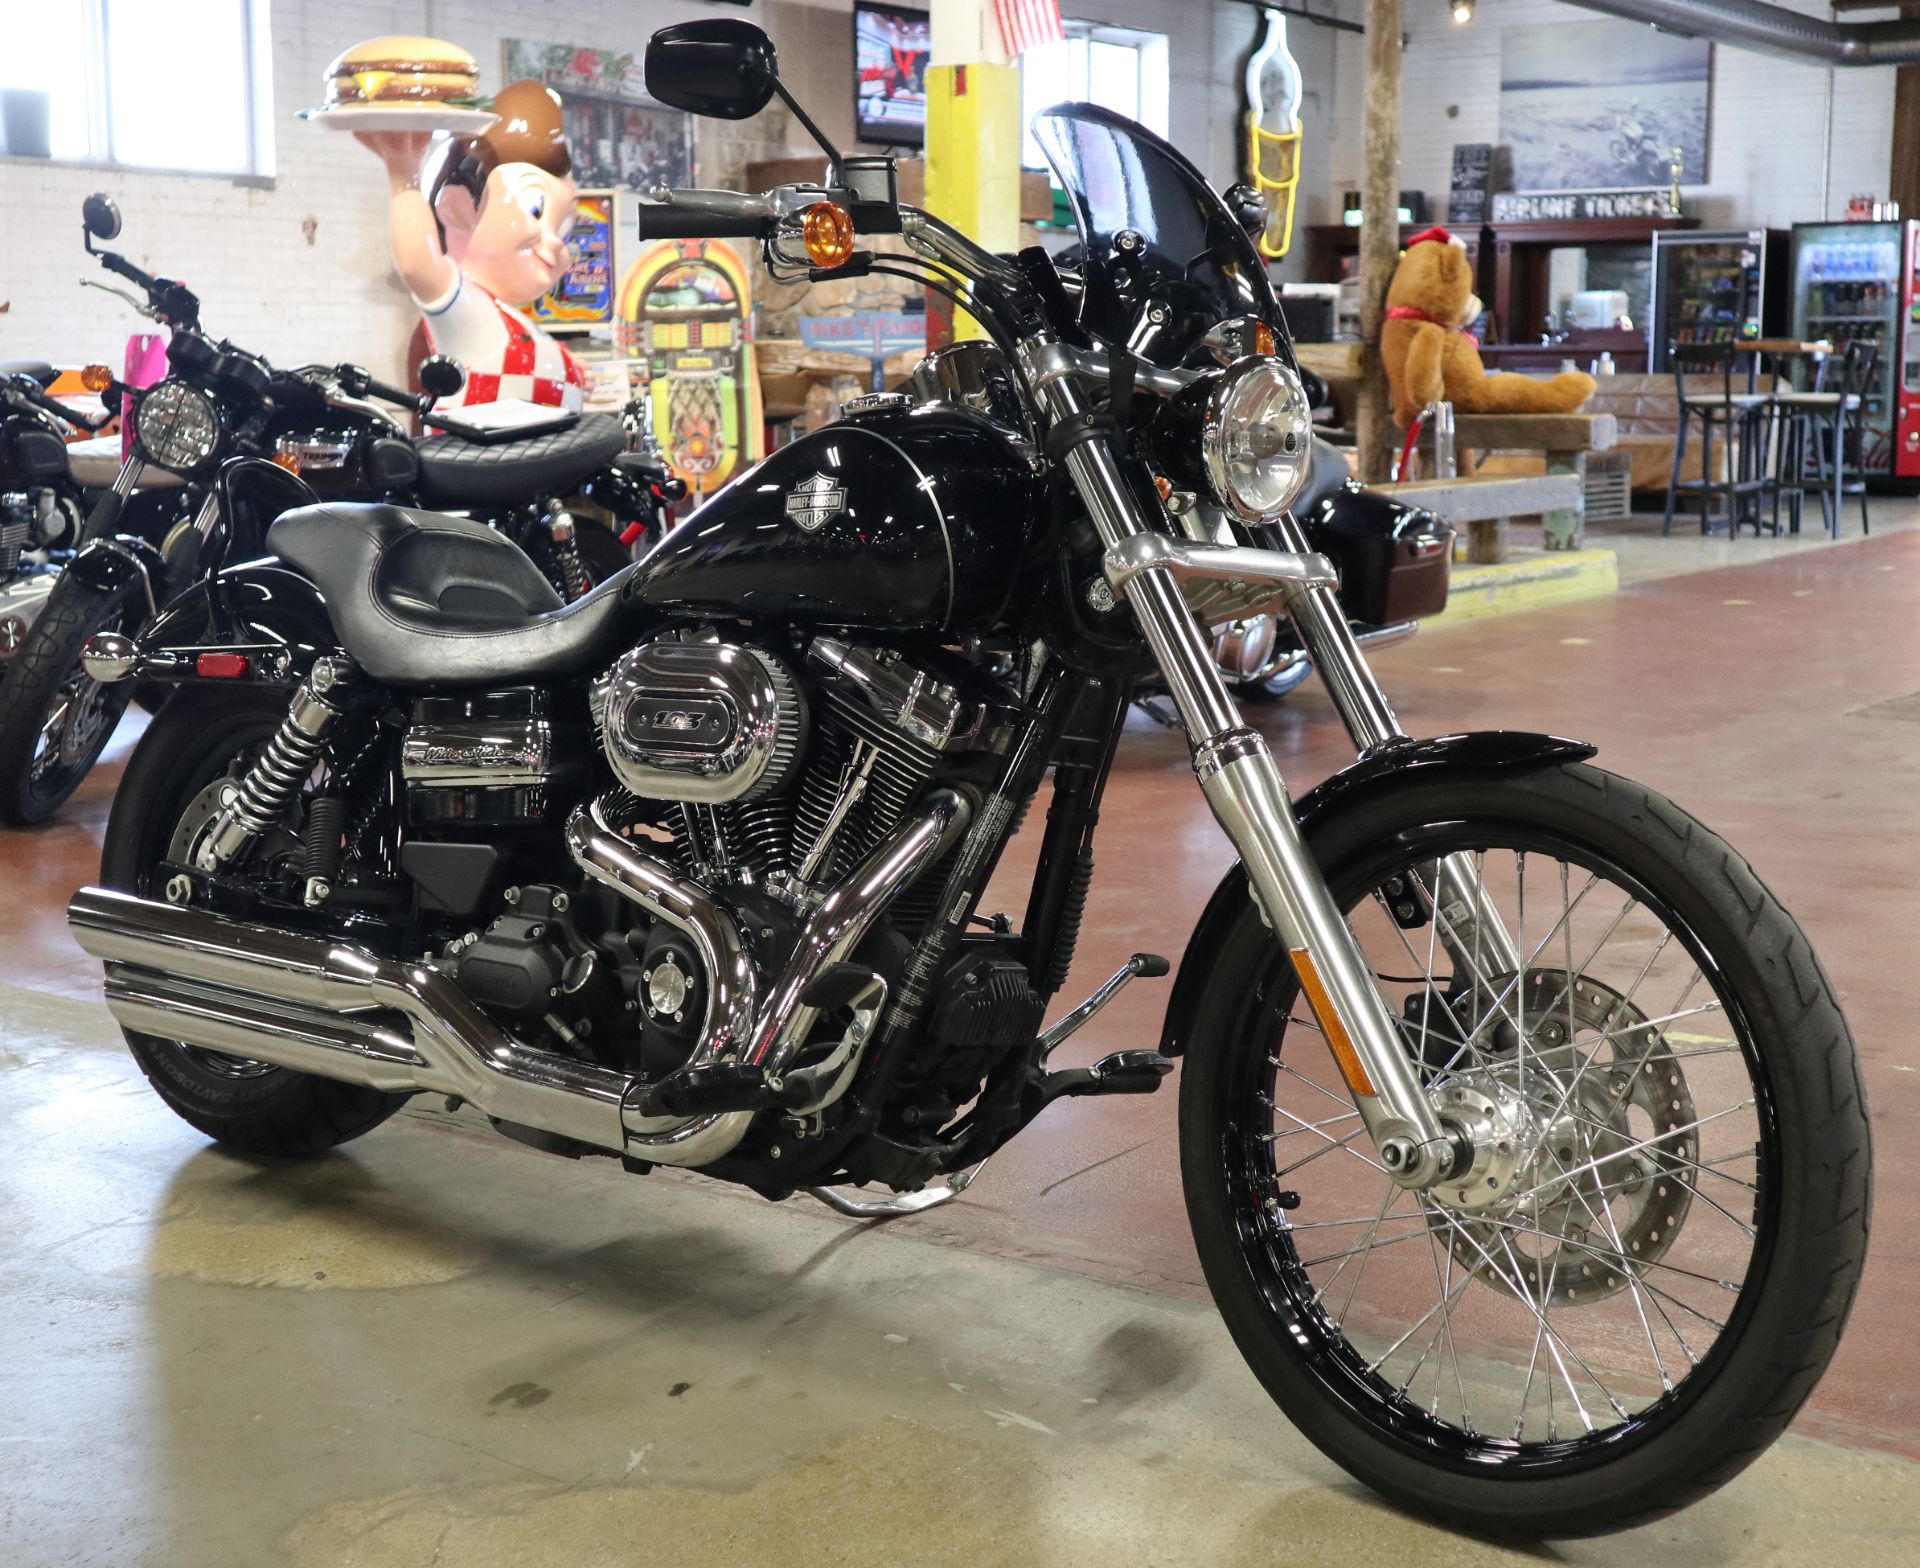 2017 Harley-Davidson Wide Glide in New London, Connecticut - Photo 2